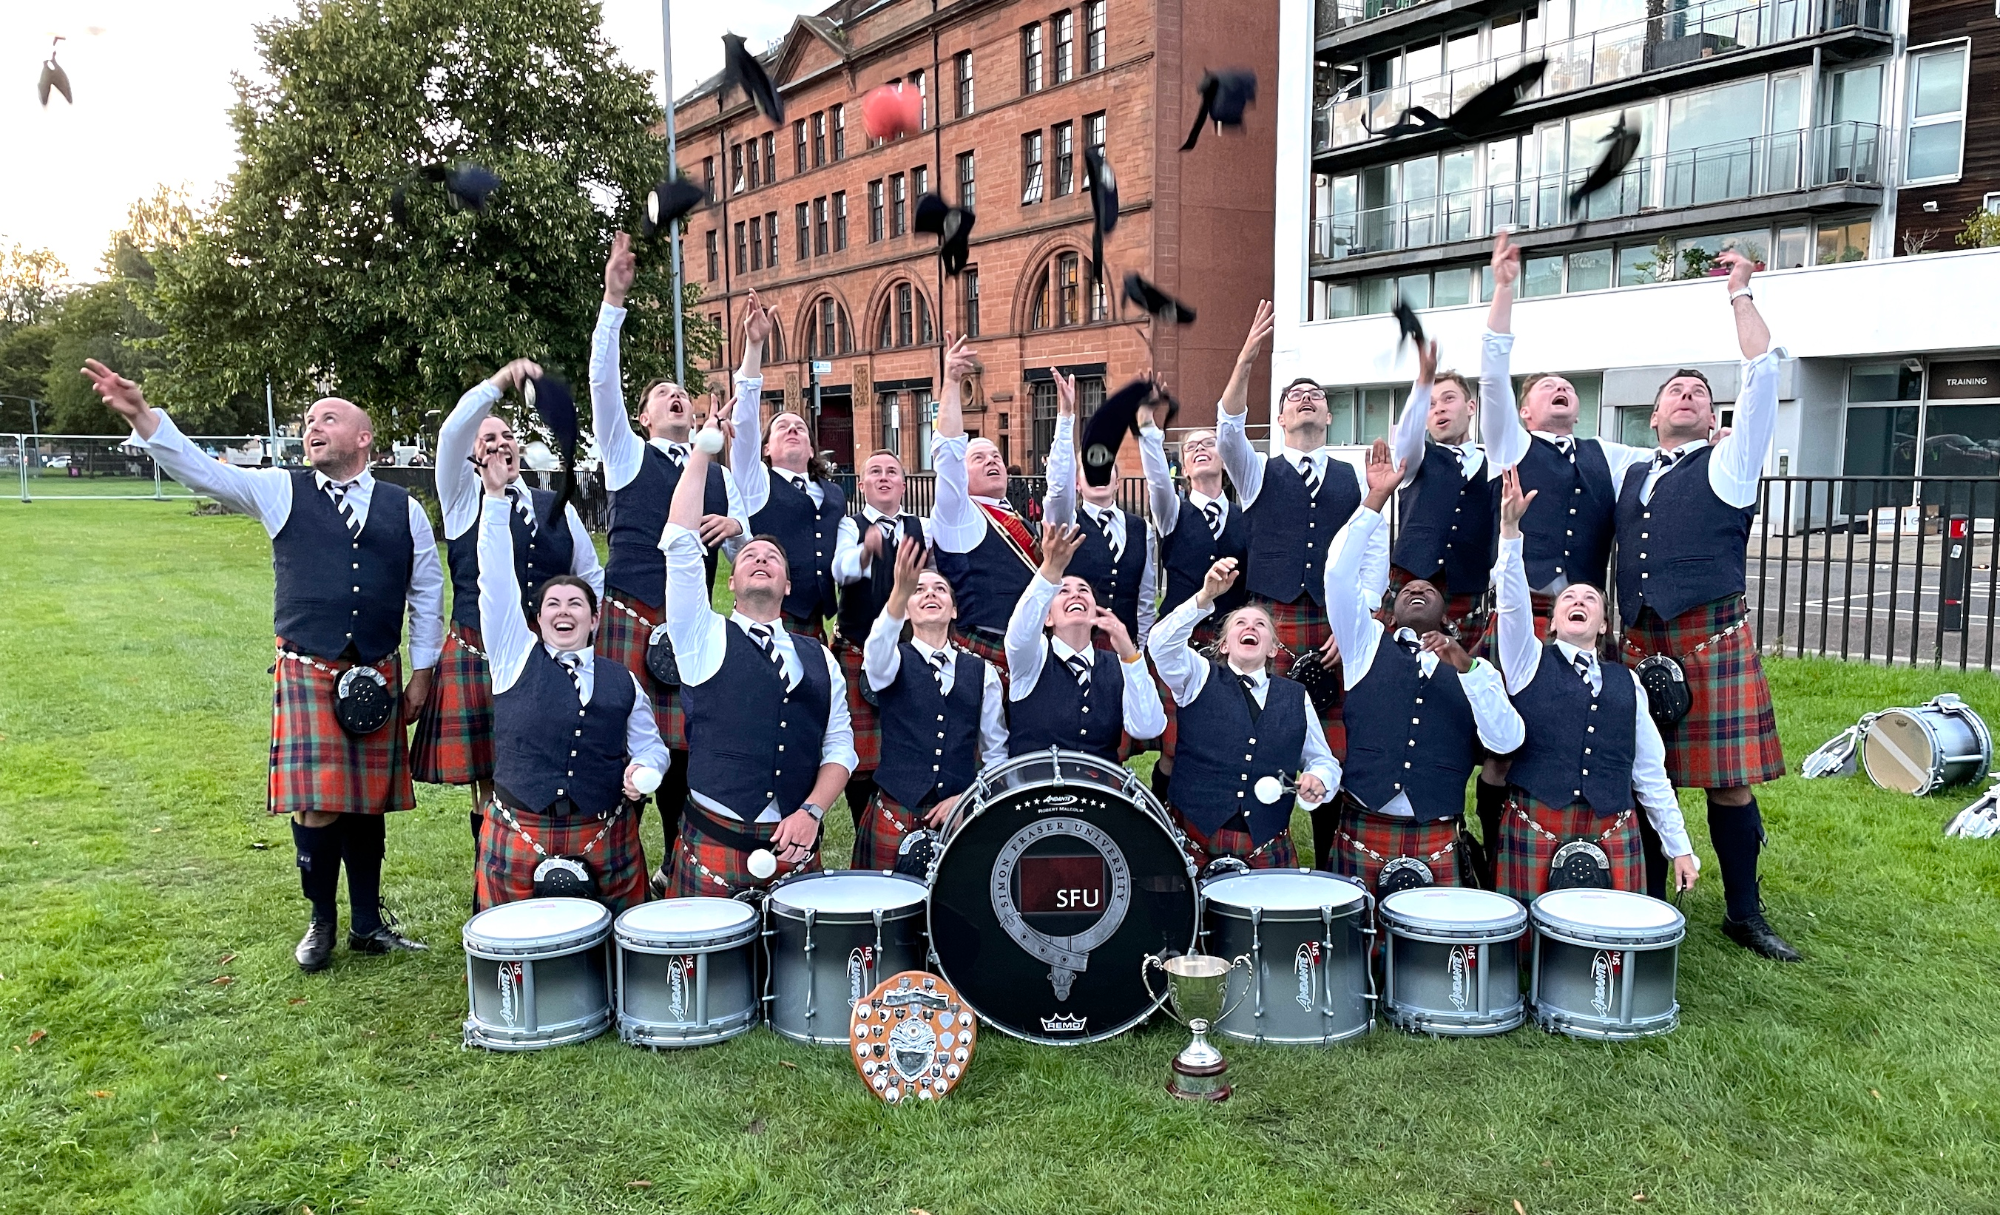 SFU Pipe Band reclaims best drum corps title, juniors land 2nd at Worlds 